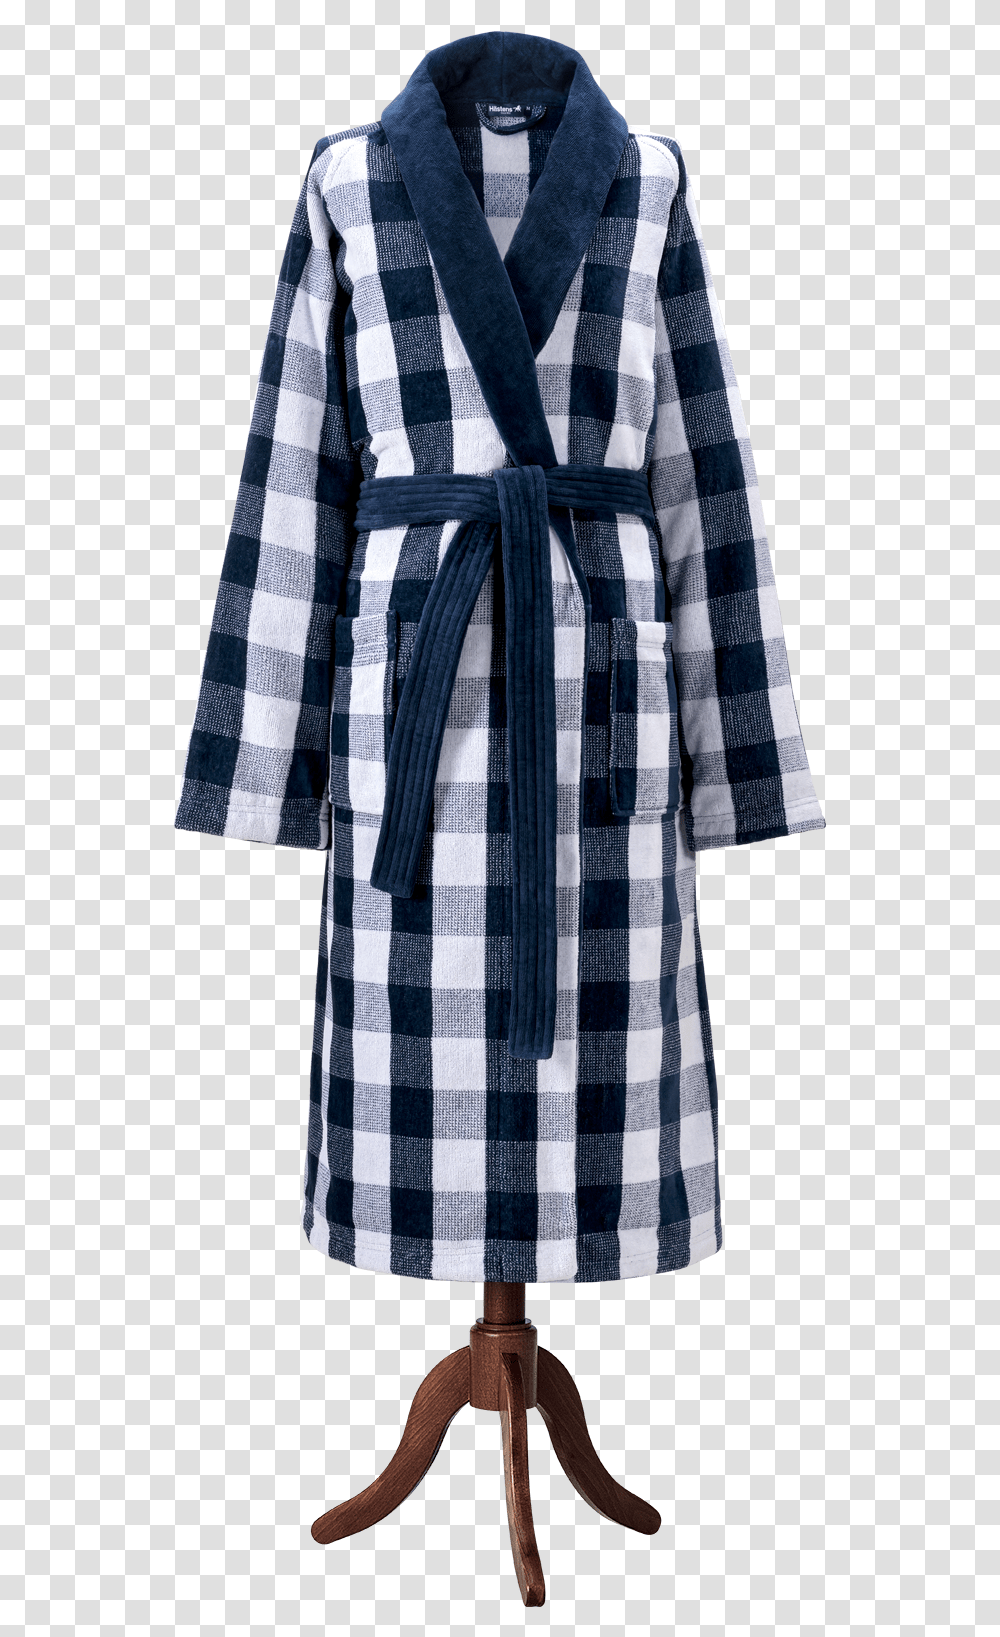 Hastens Blue Check Robe Hastens Robe, Clothing, Apparel, Fashion, Coat Transparent Png